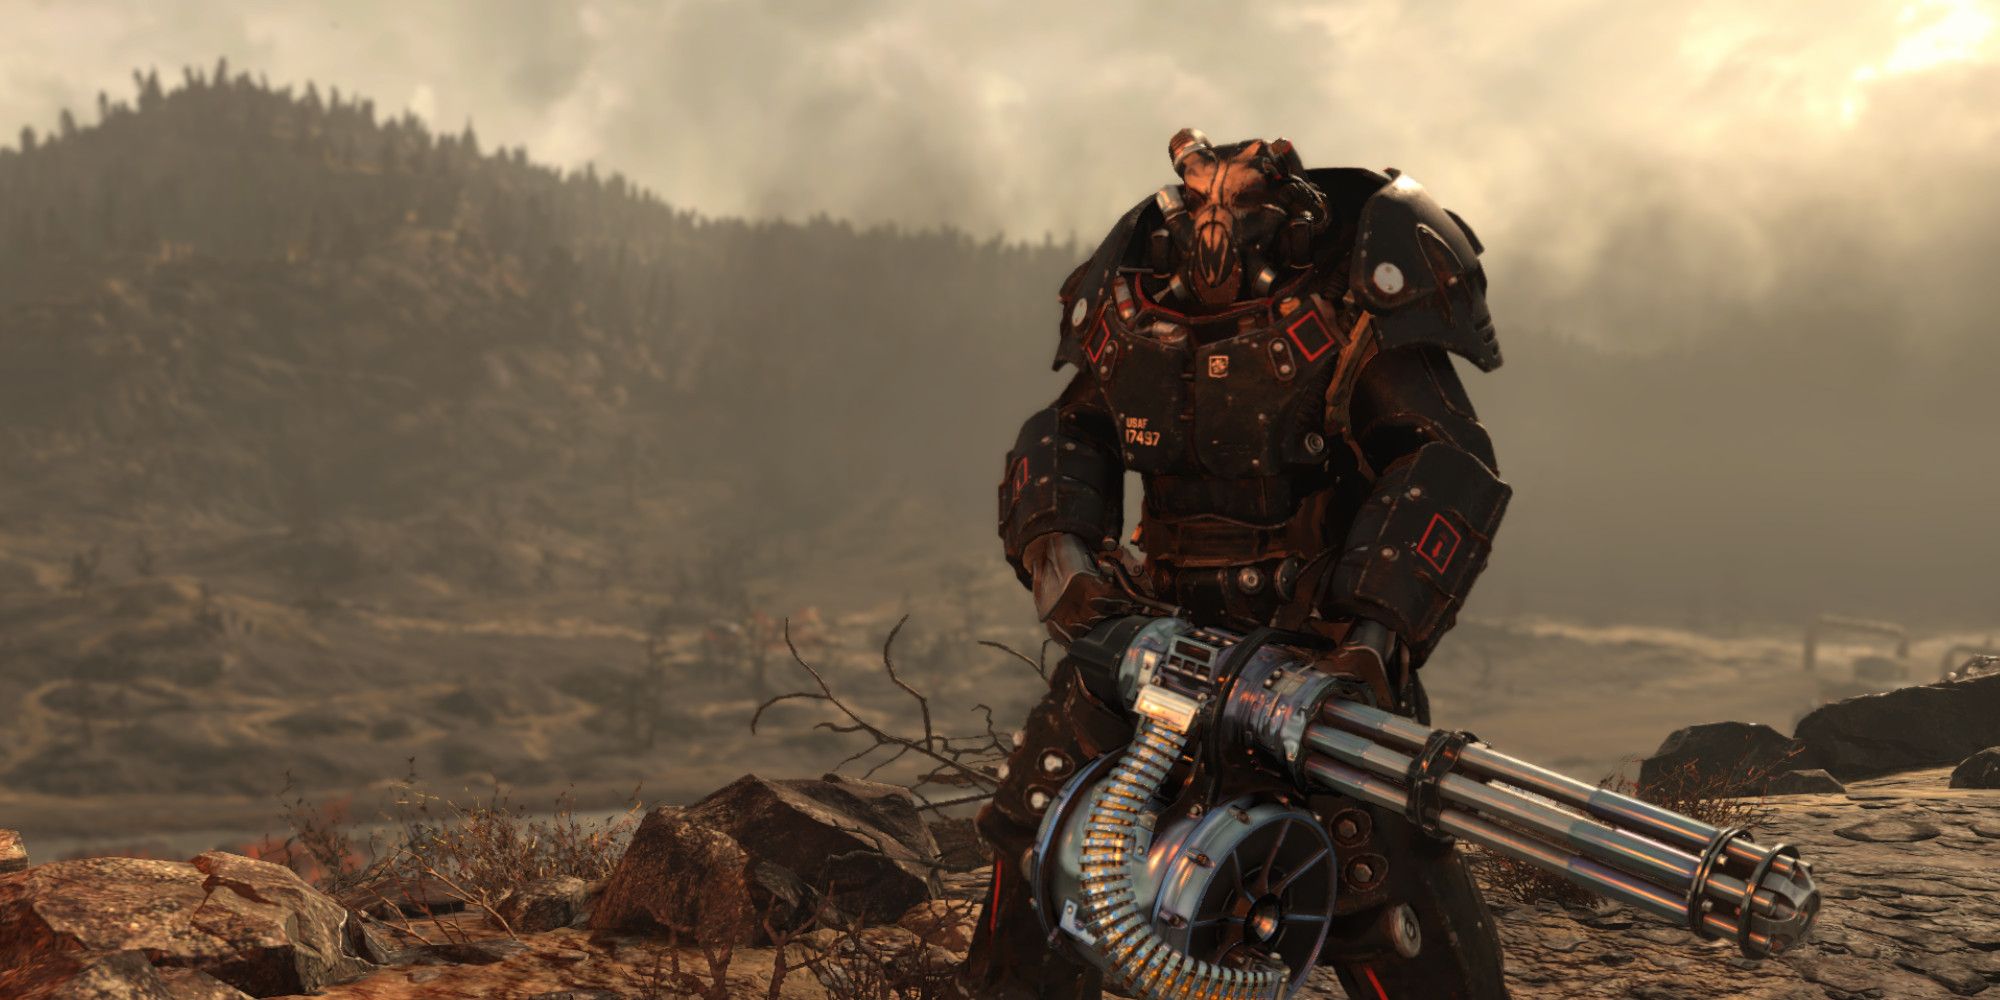 A heavily armored character explores Appalachia